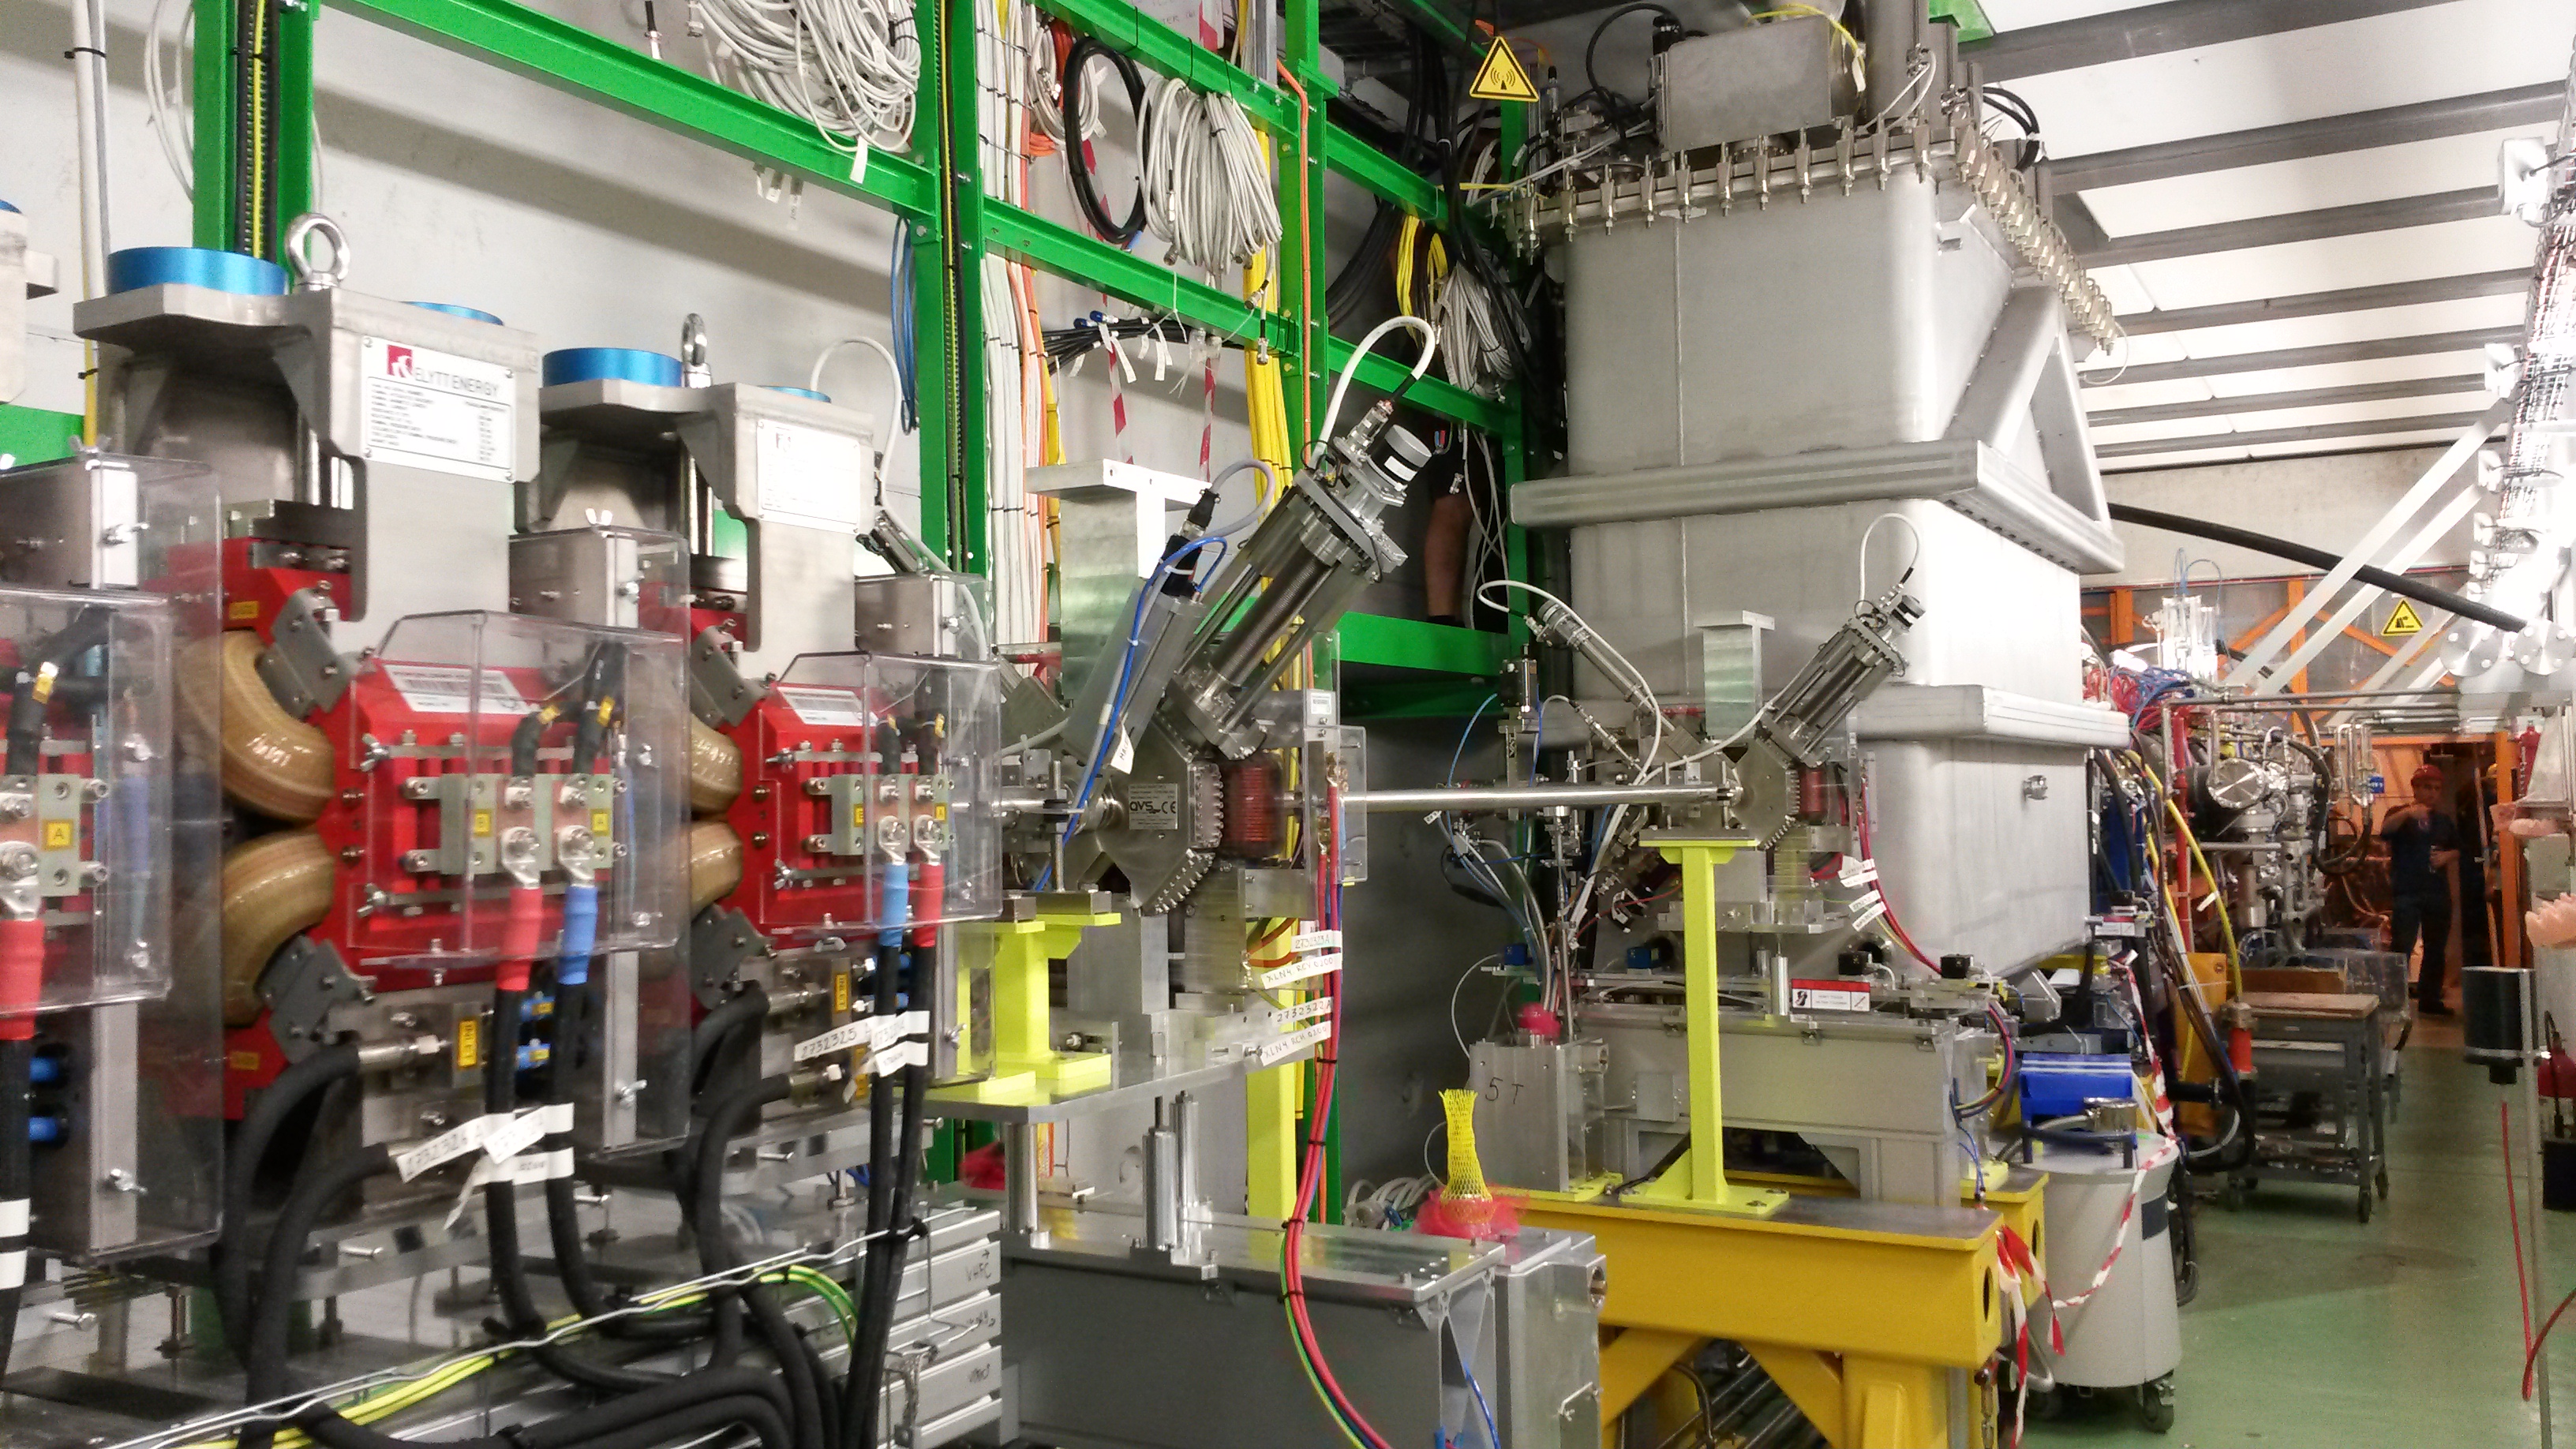 The ISOLDE beamline that supplies the Miniball array. The first HIE-ISOLDE cryomodule can be seen in the background, in its light-grey cryostat.